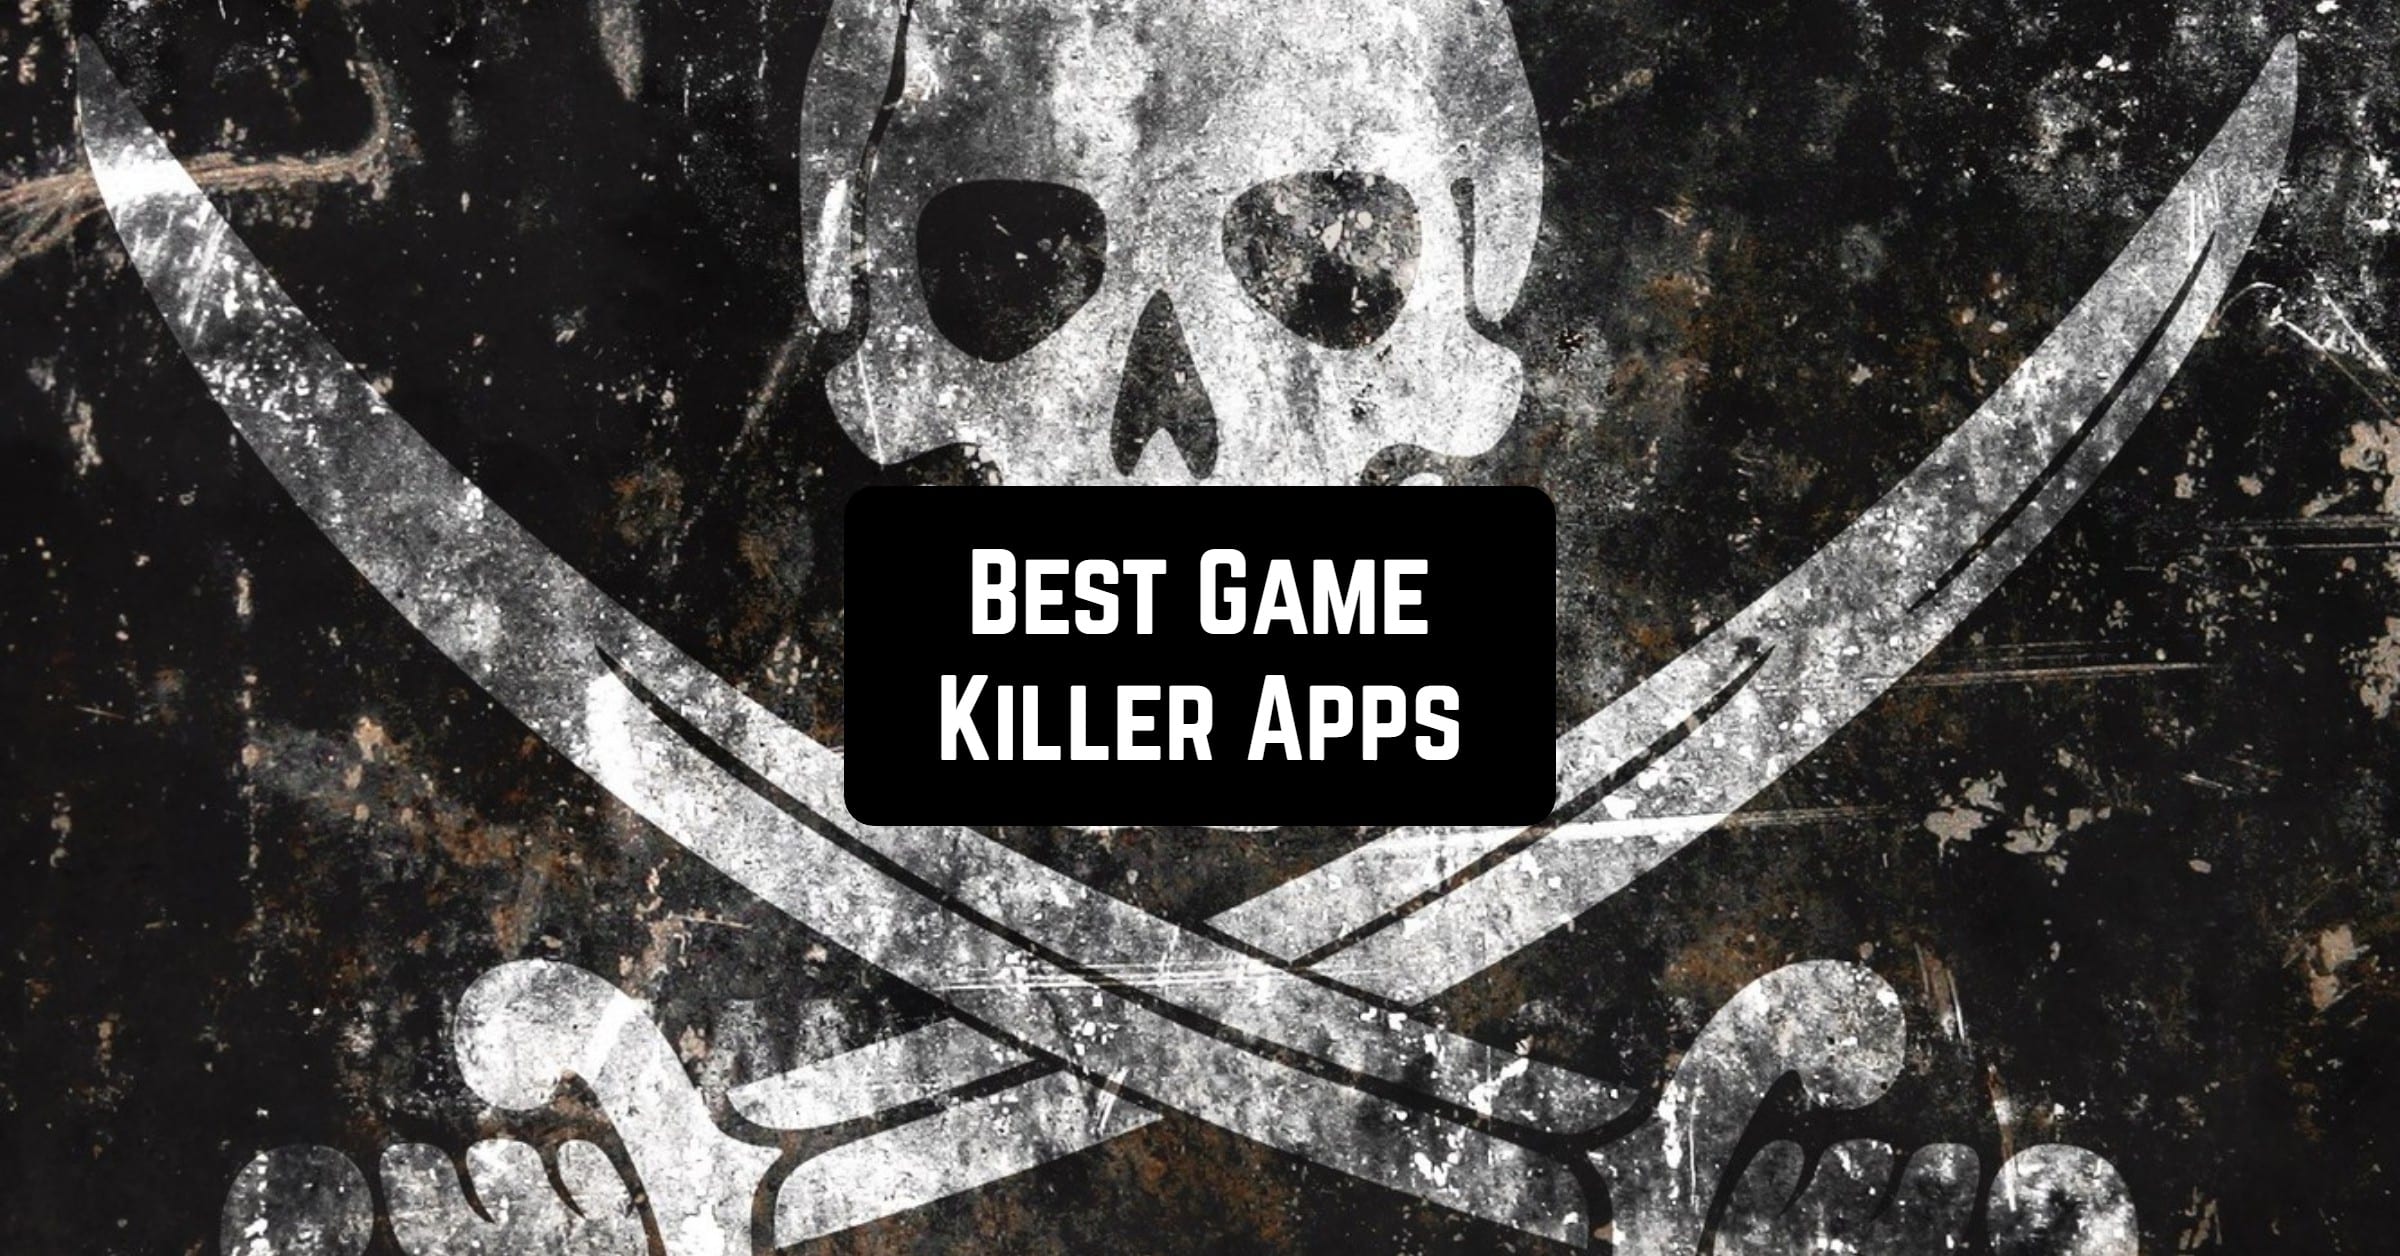 11 Best game killer apps for Android & iOS | Free apps for Android and iOS